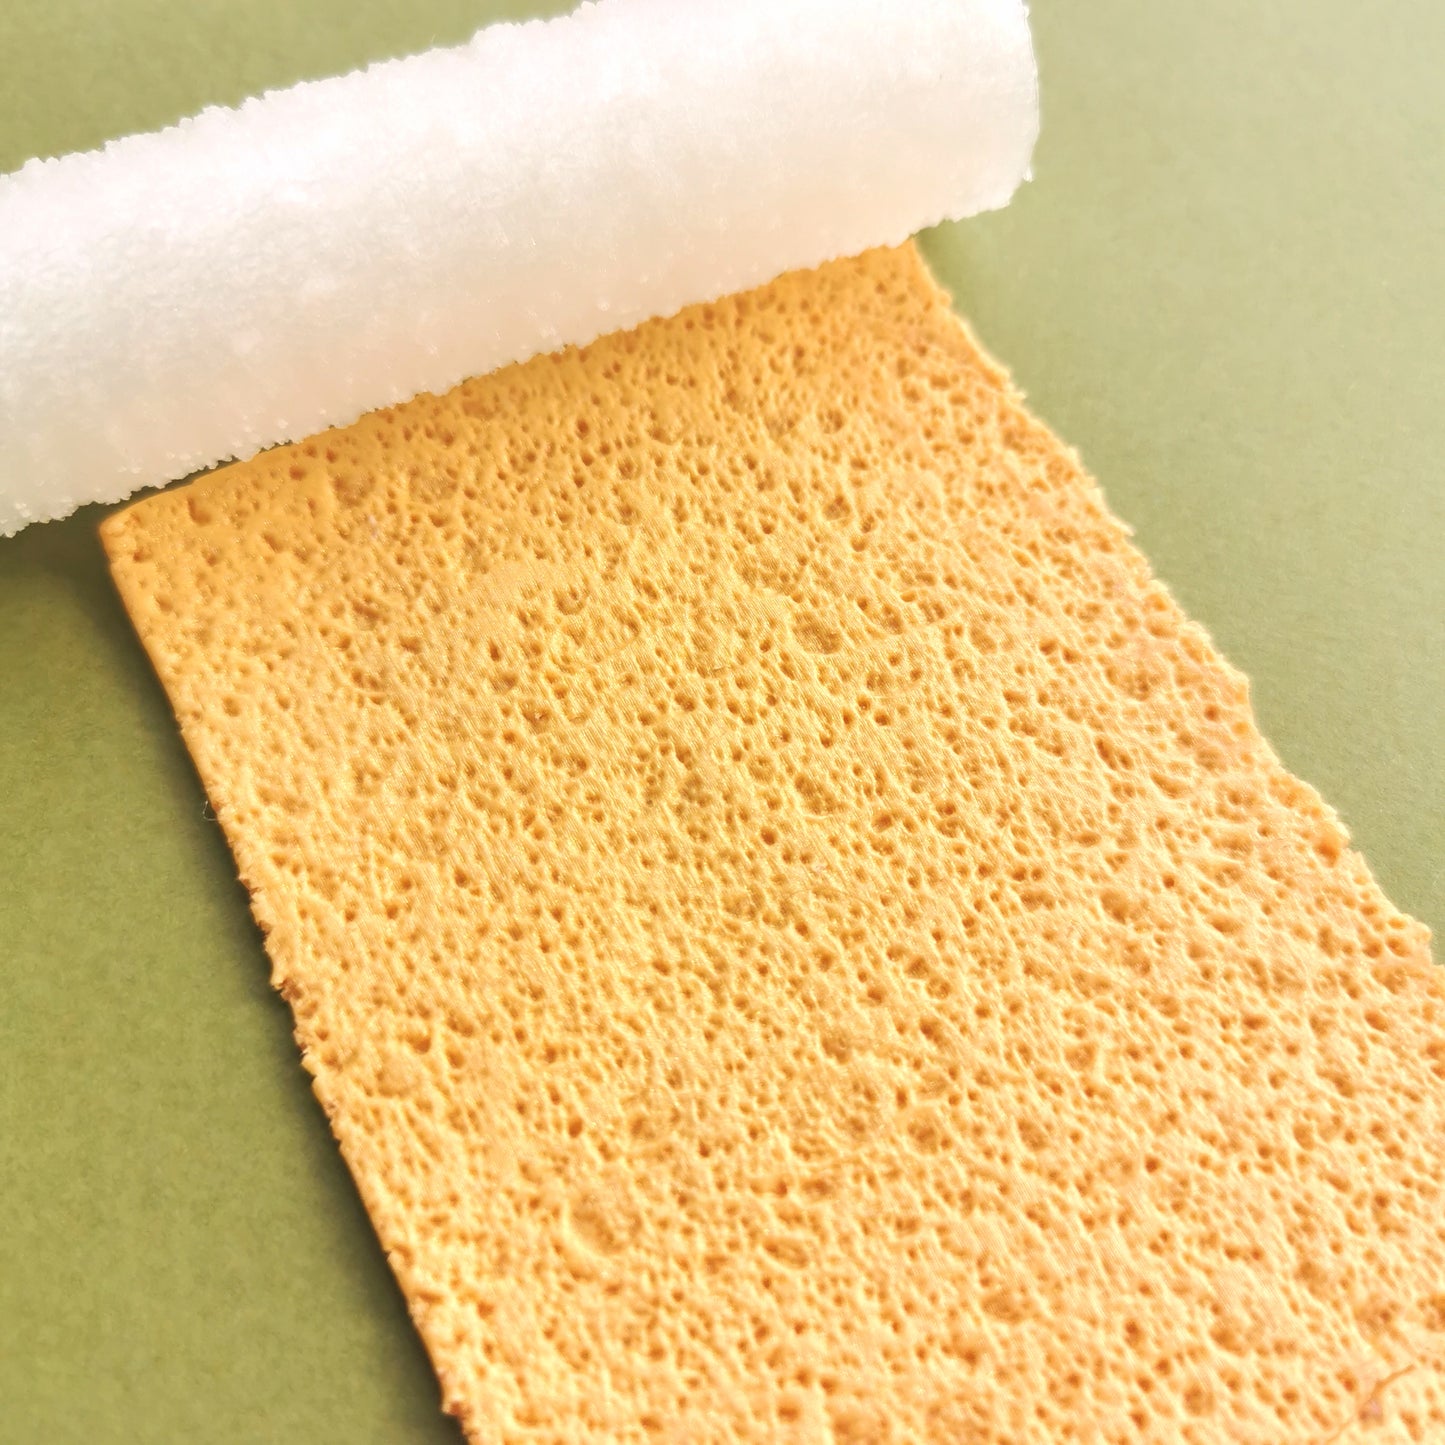 Sponge texture roller for polymer clay